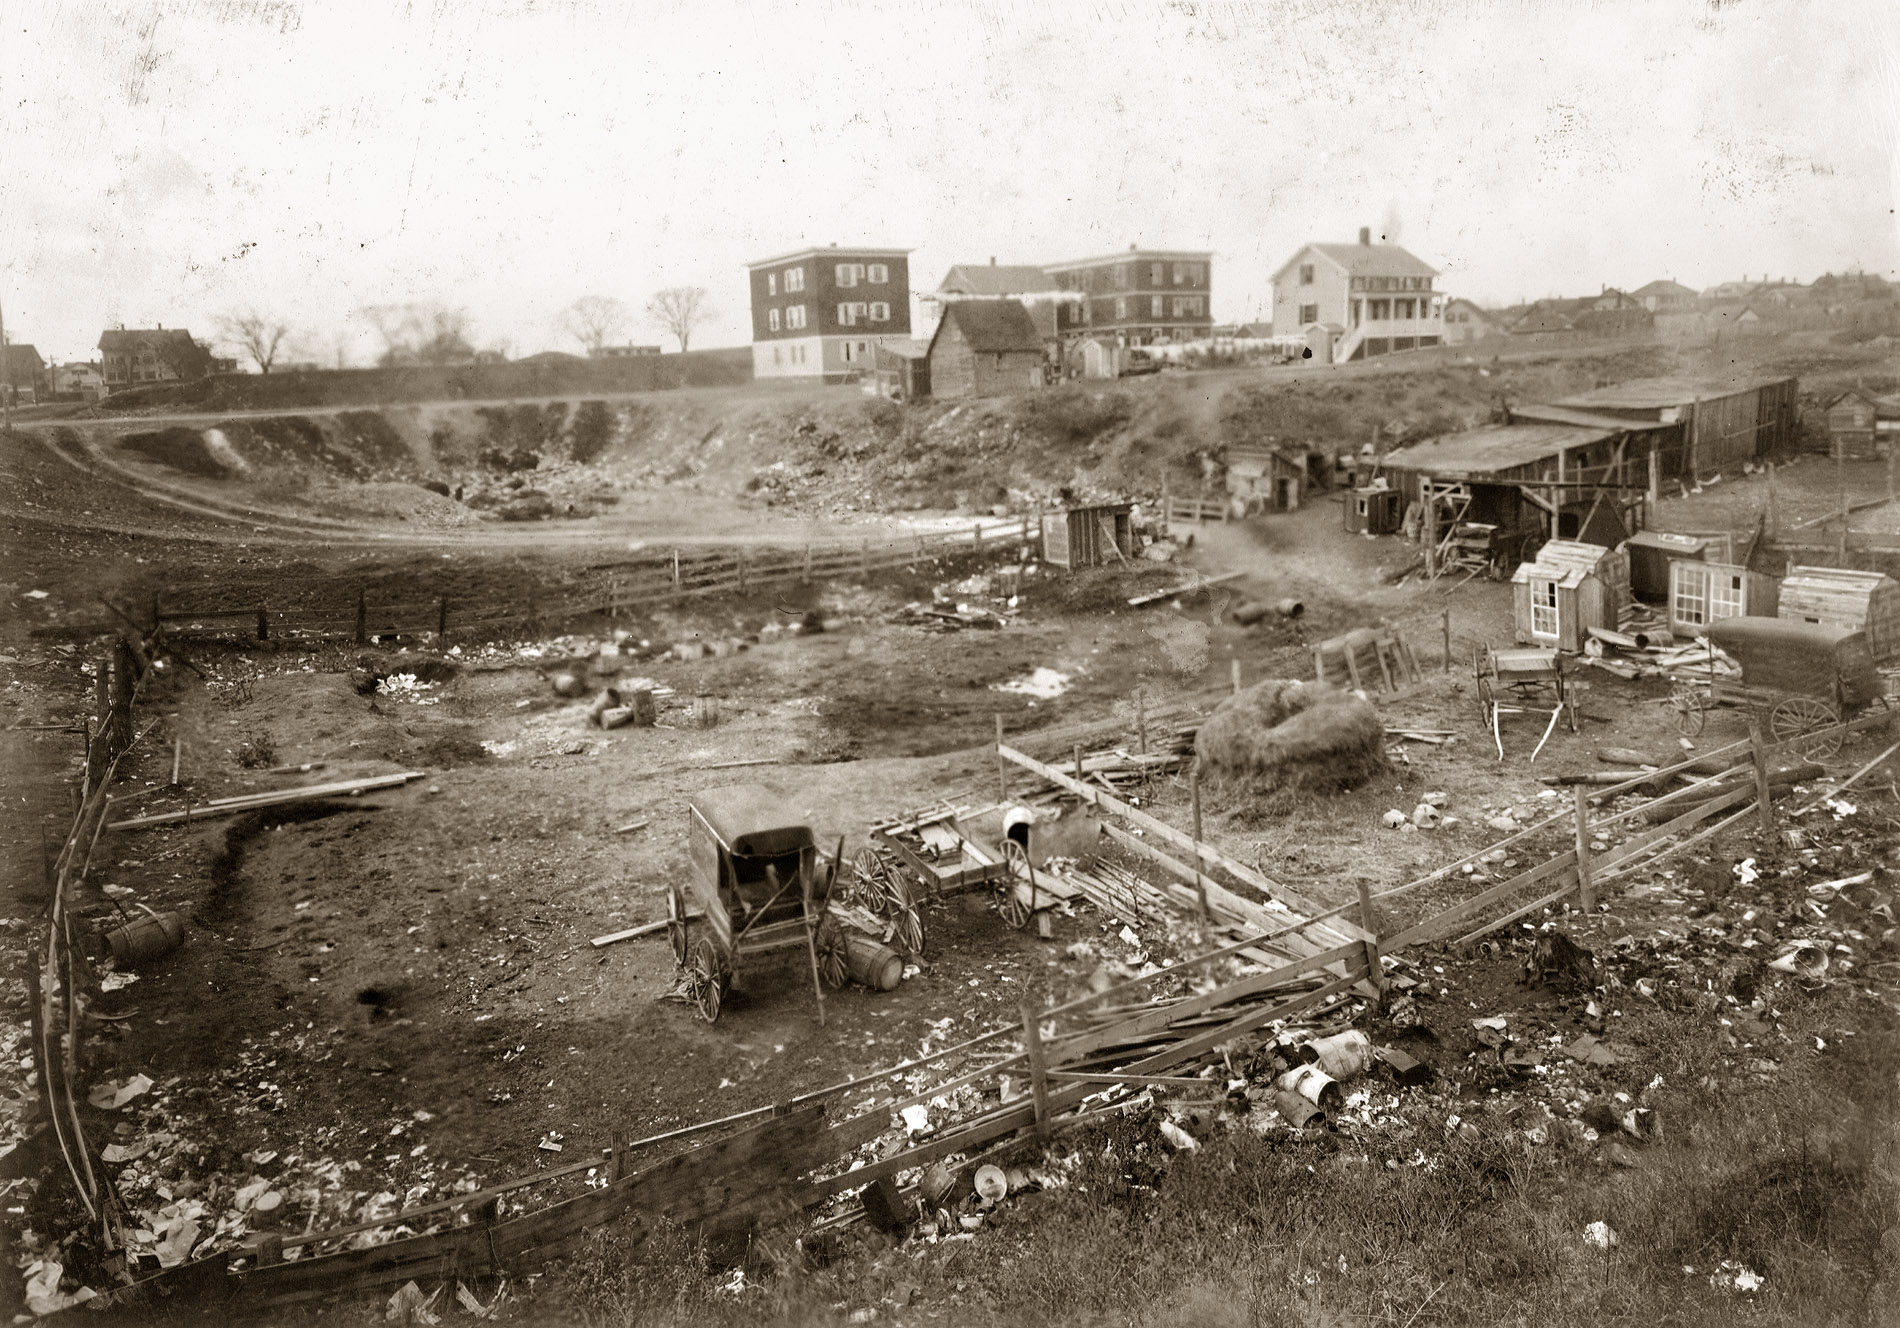 November 1912. "For Child Welfare Exhibit 1912-13. Whitman Street dump, Pawtucket, Rhode Island." Photograph by Lewis Wickes Hine. View full size.